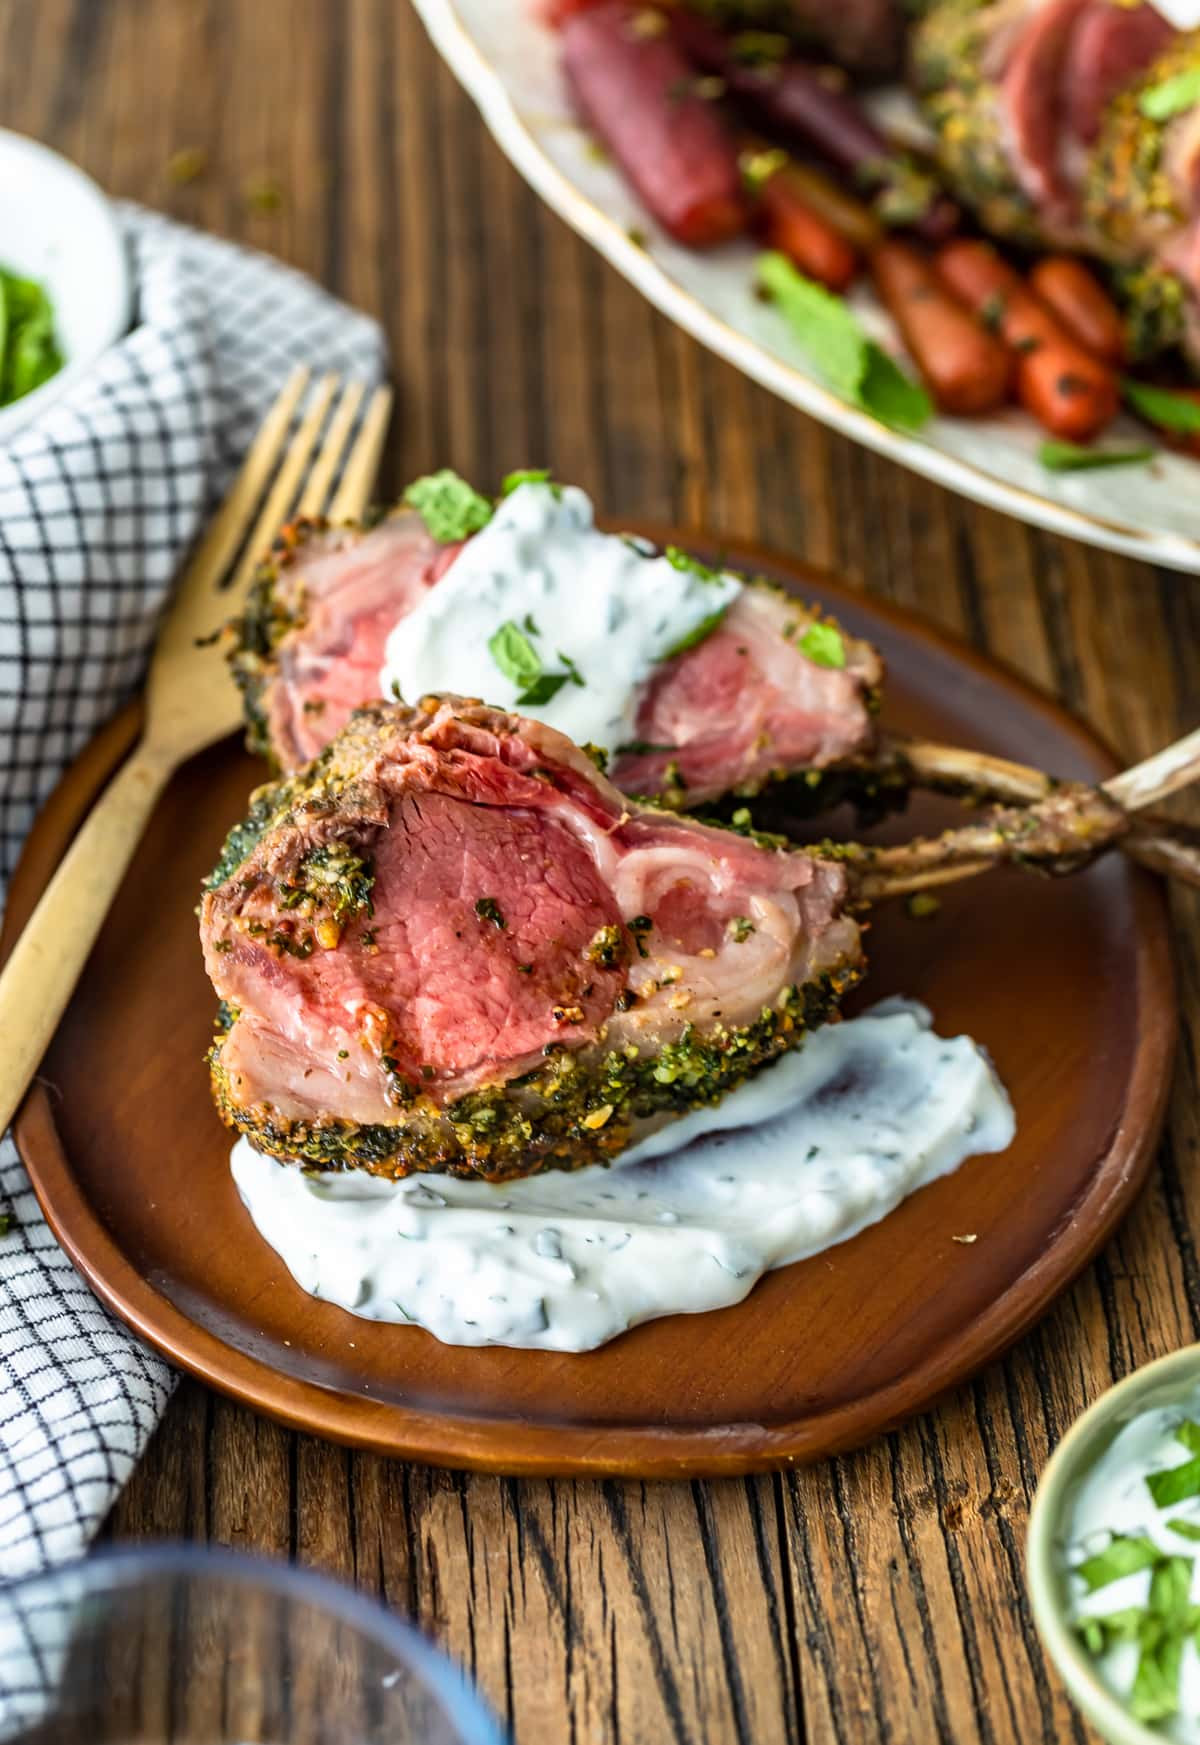 Sauces For Rack Of Lamb
 Herb Crusted Rack of Lamb Recipe with Mint Yogurt Sauce